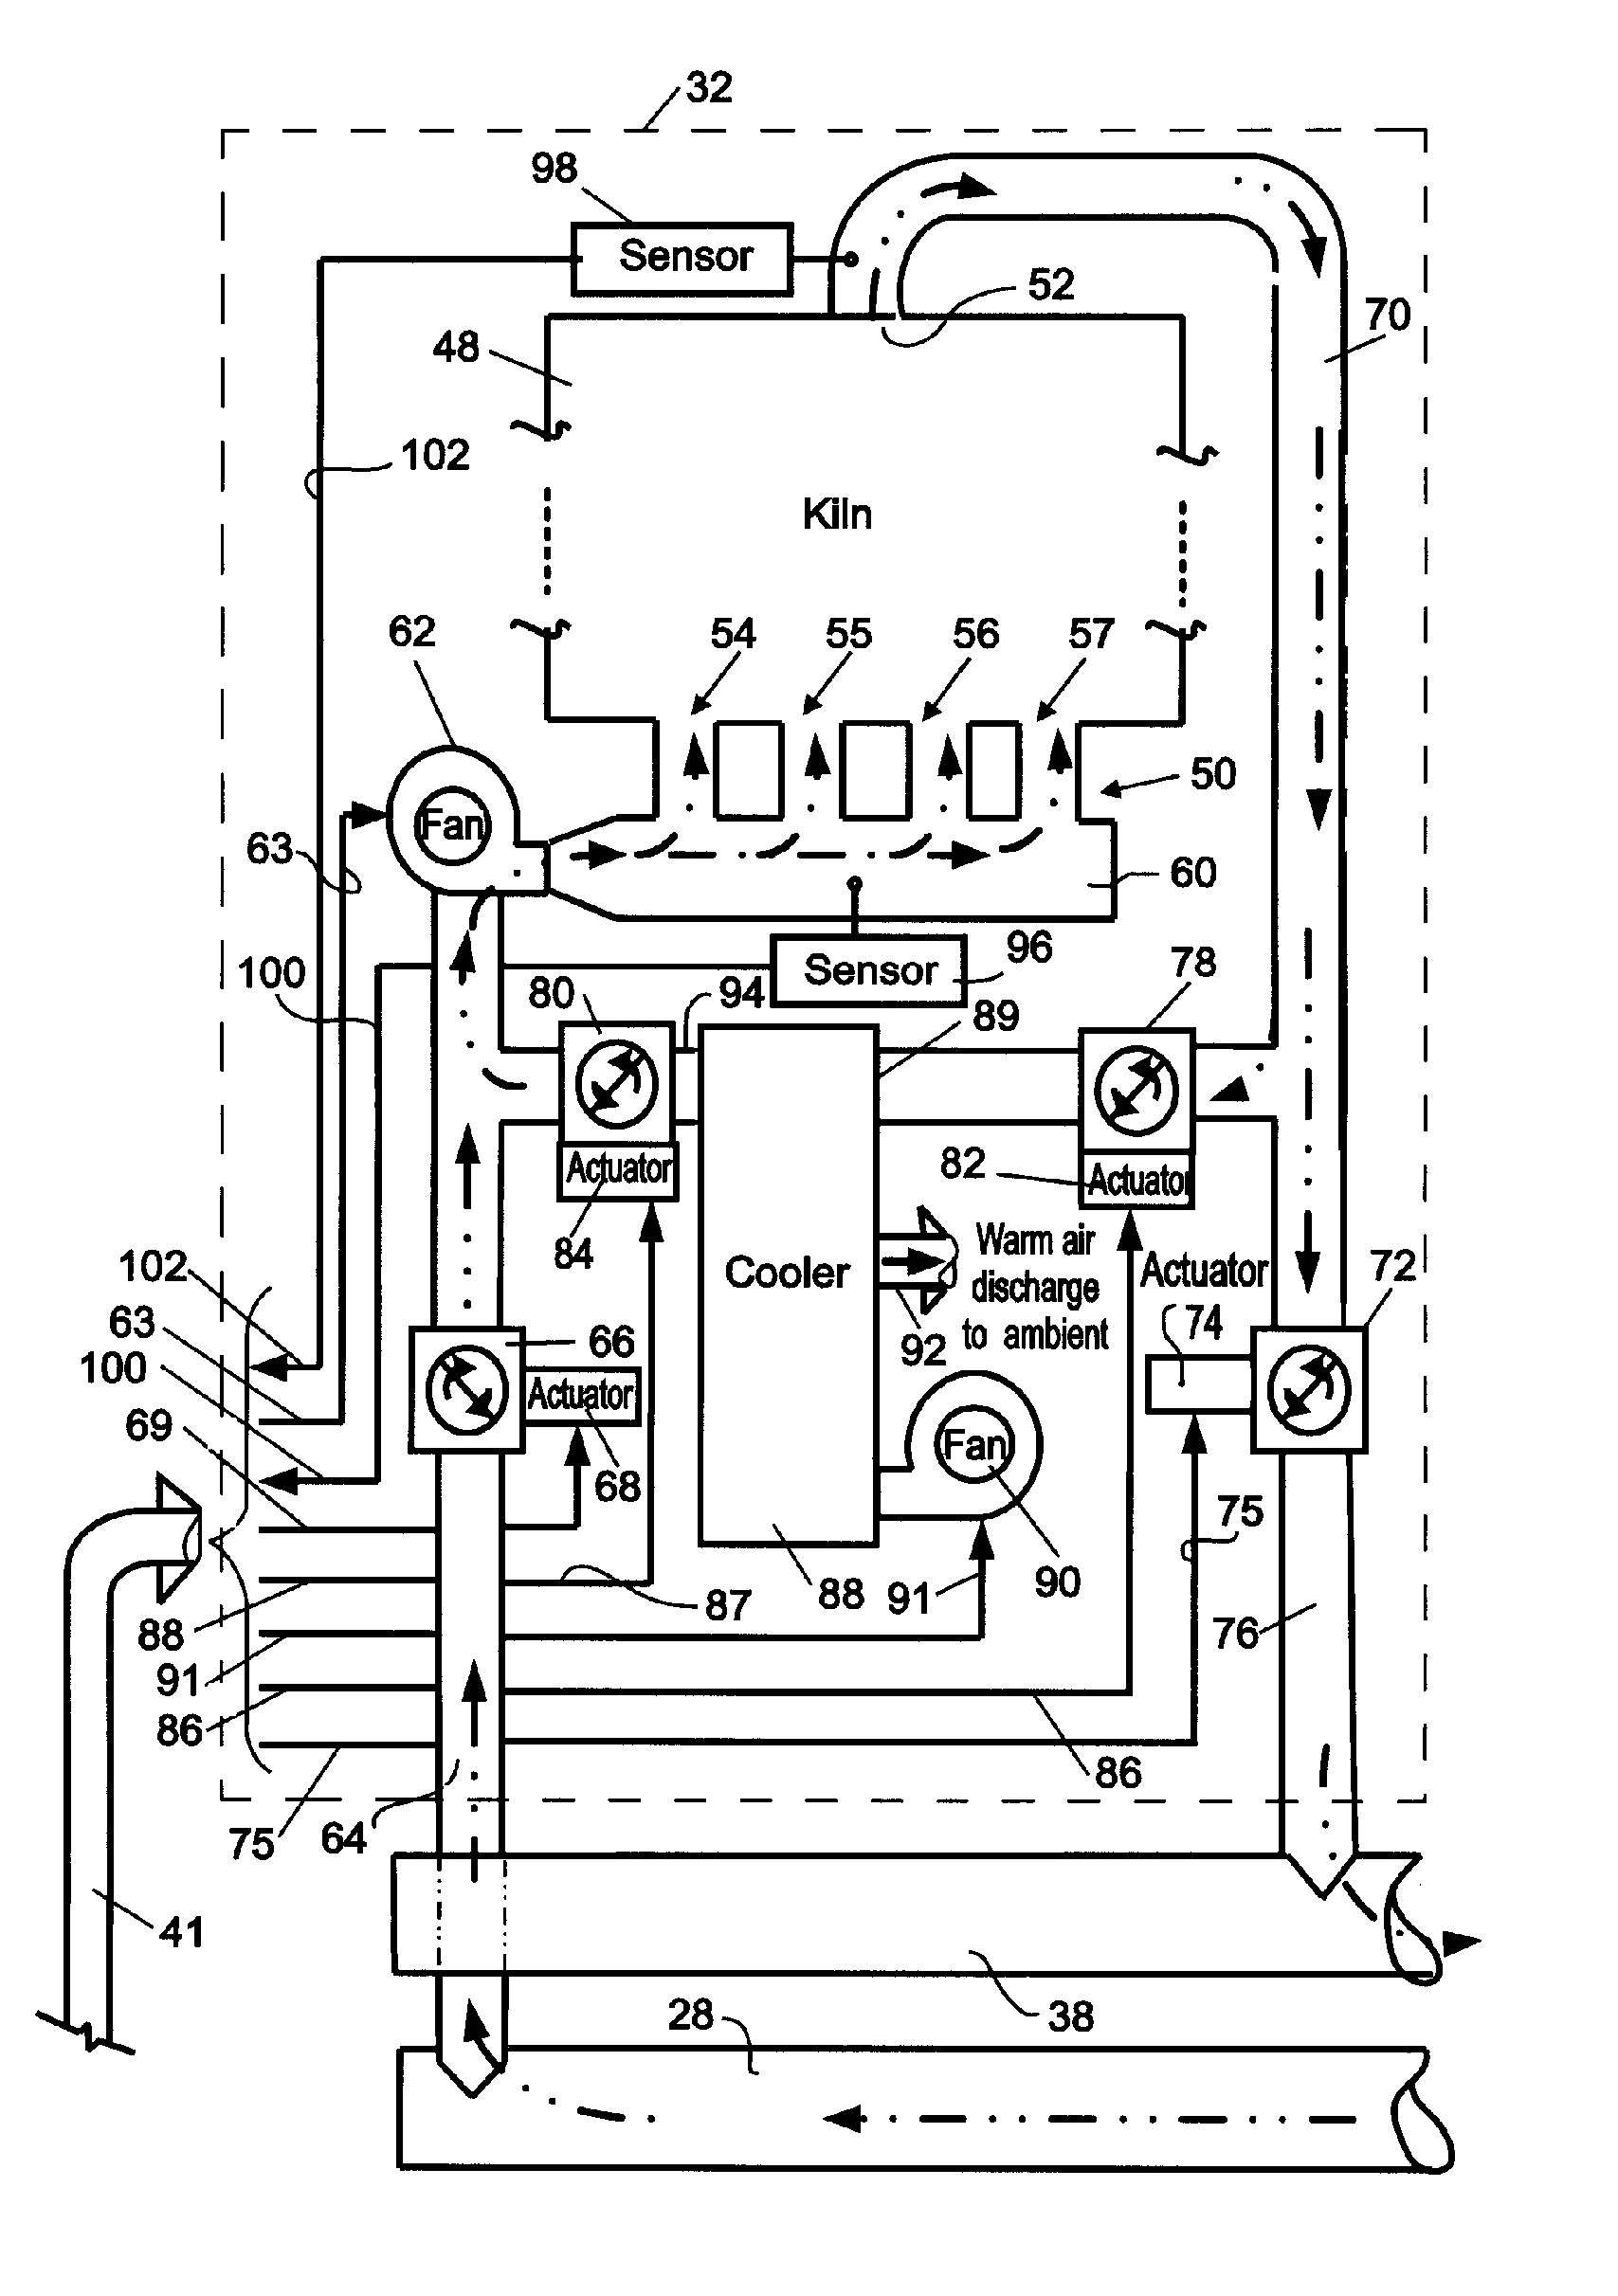 Method and apparatus for producing charcoal